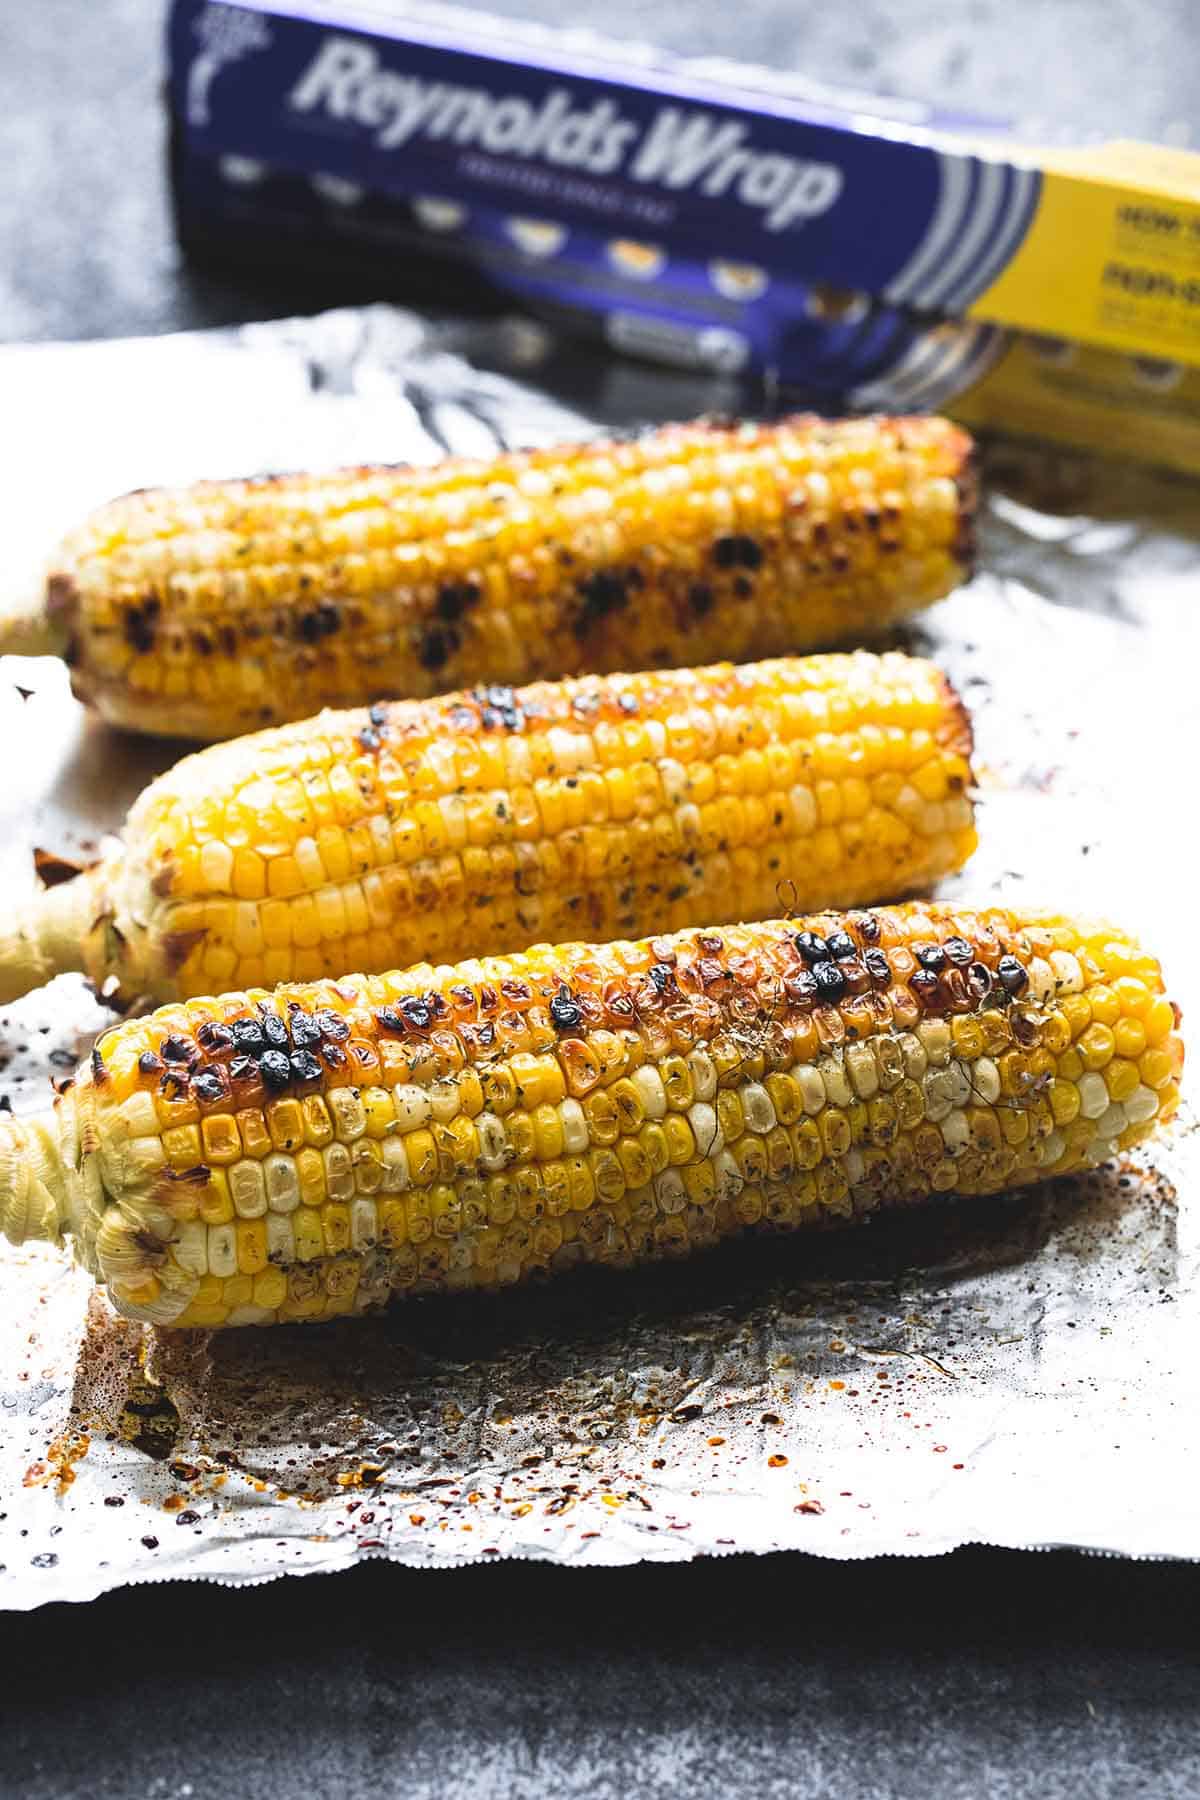 grilled corn on the cobs on aluminum foil with the box of aluminum foil in the background.